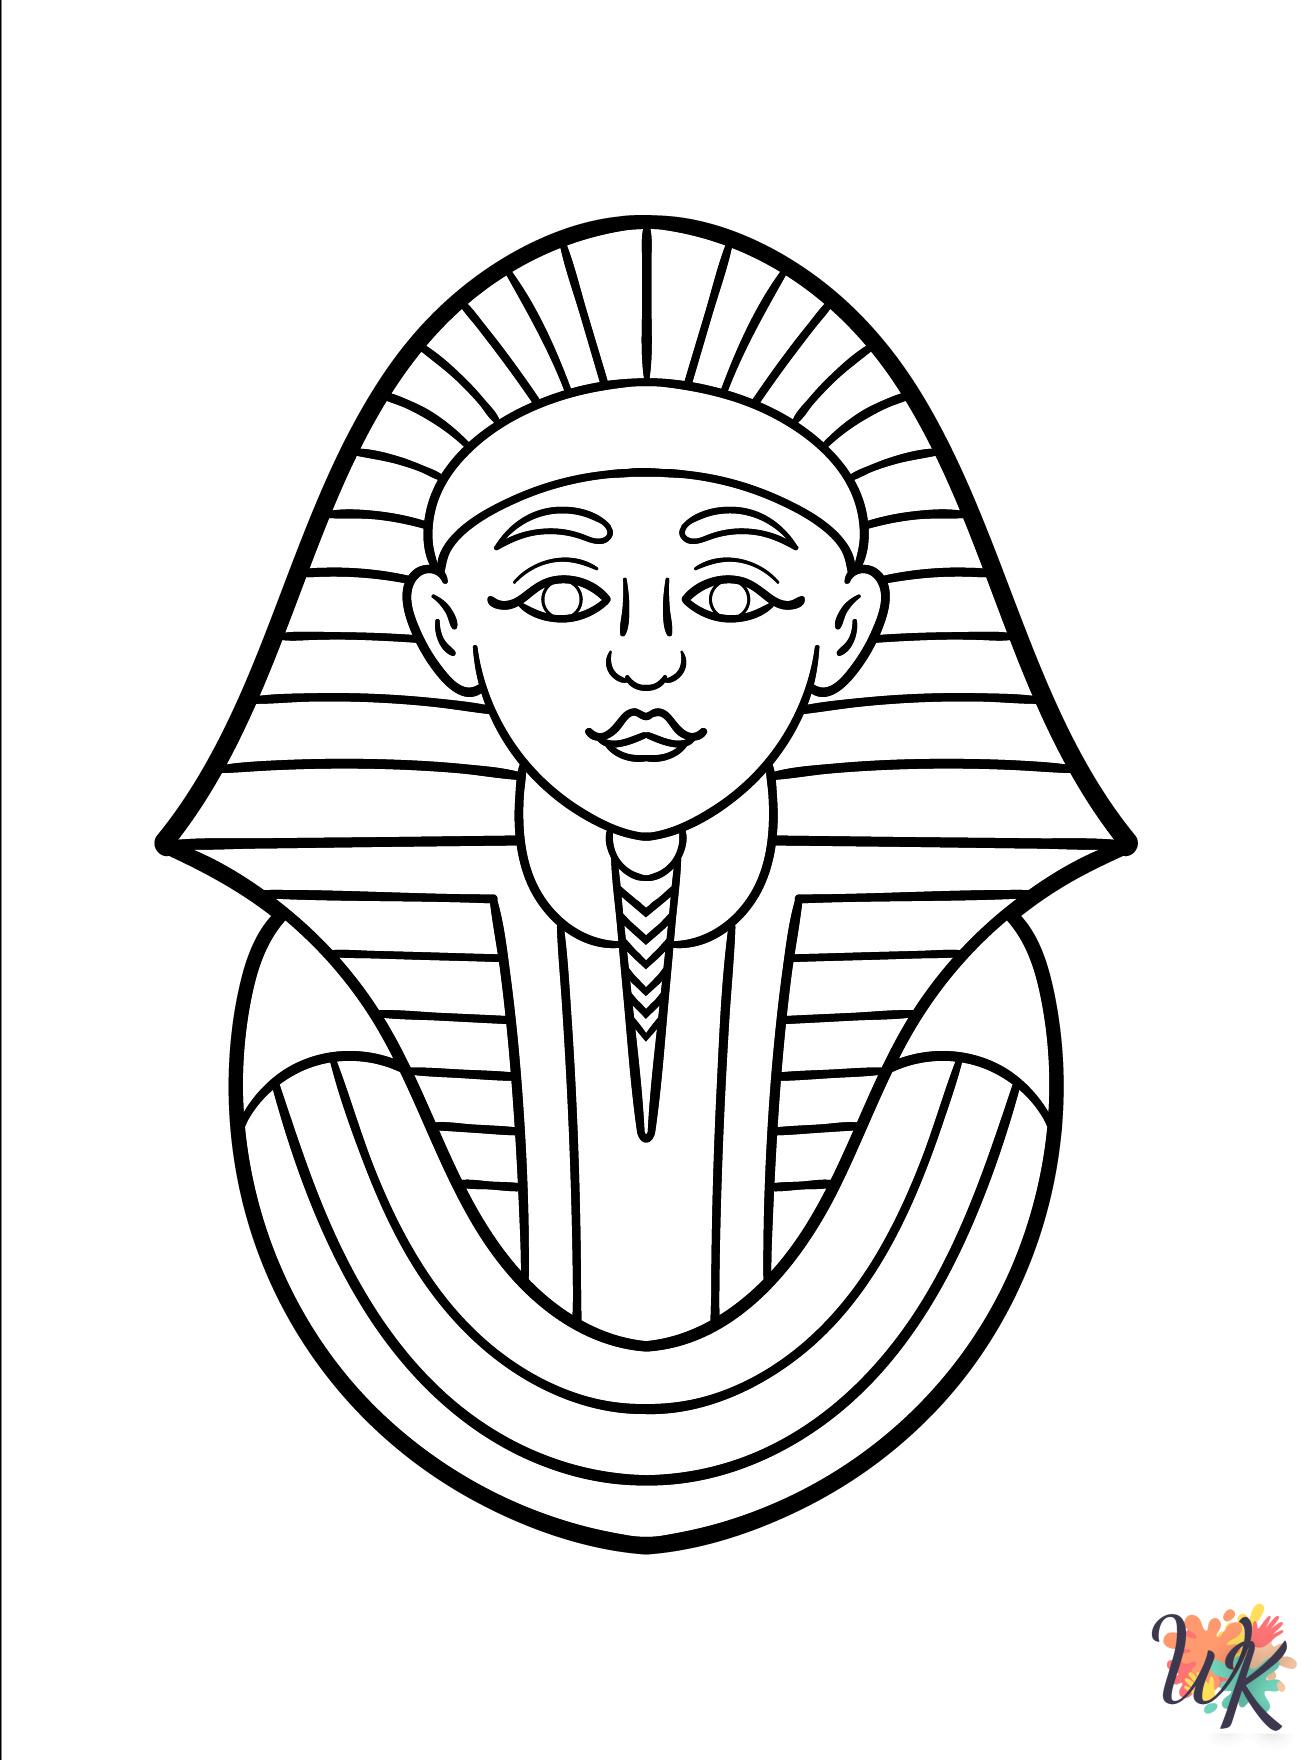 Egyptian themed coloring pages